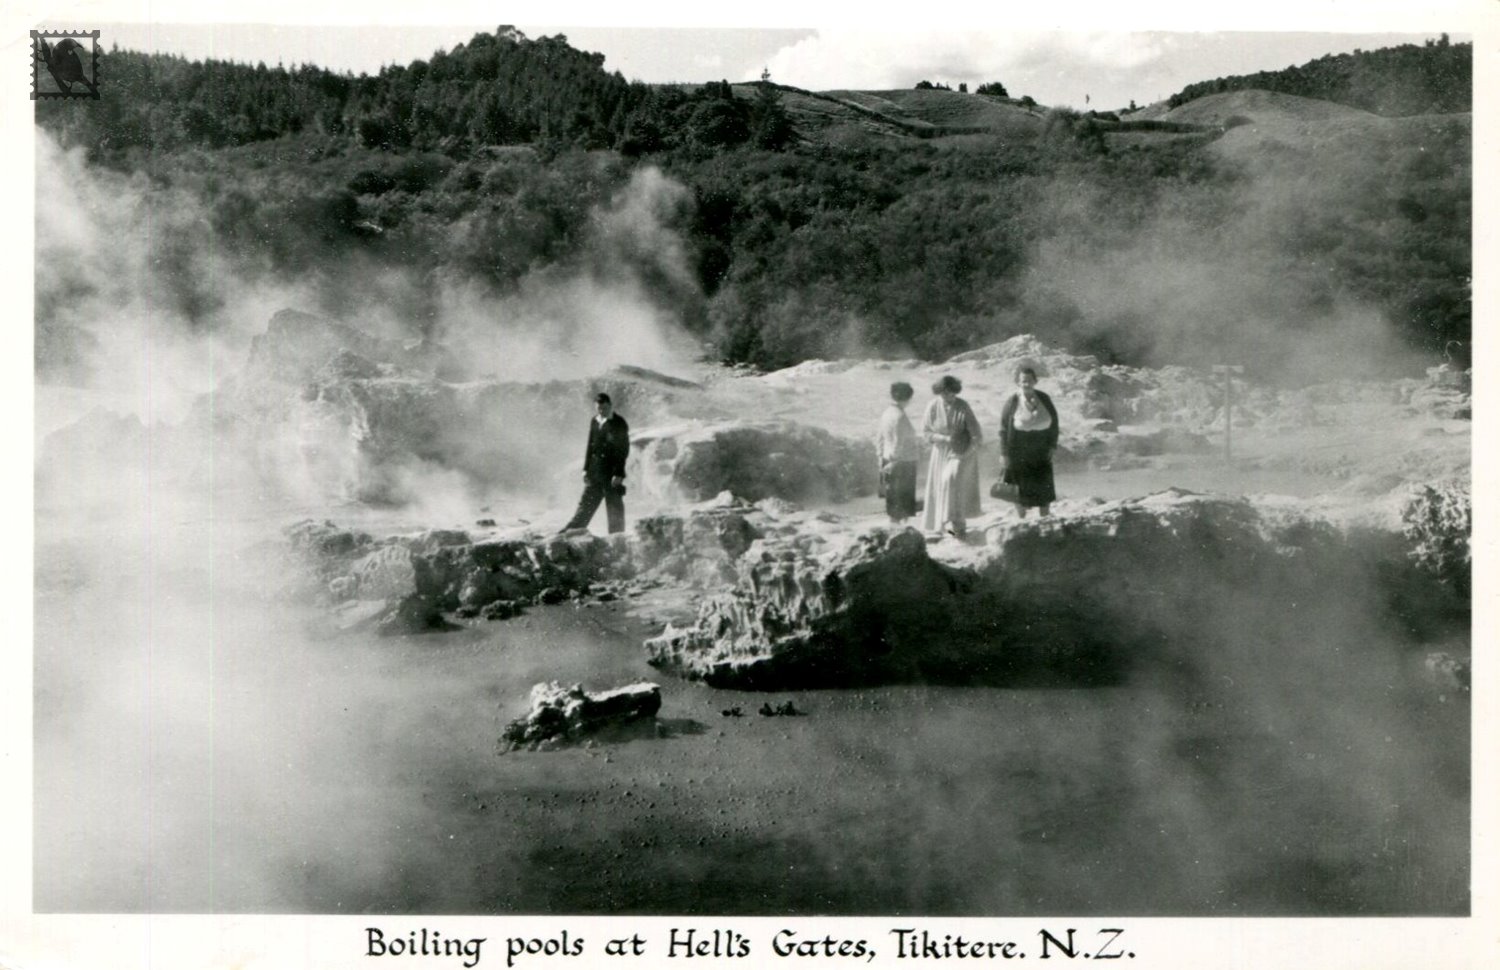 Boiling pools at Hell's Gates